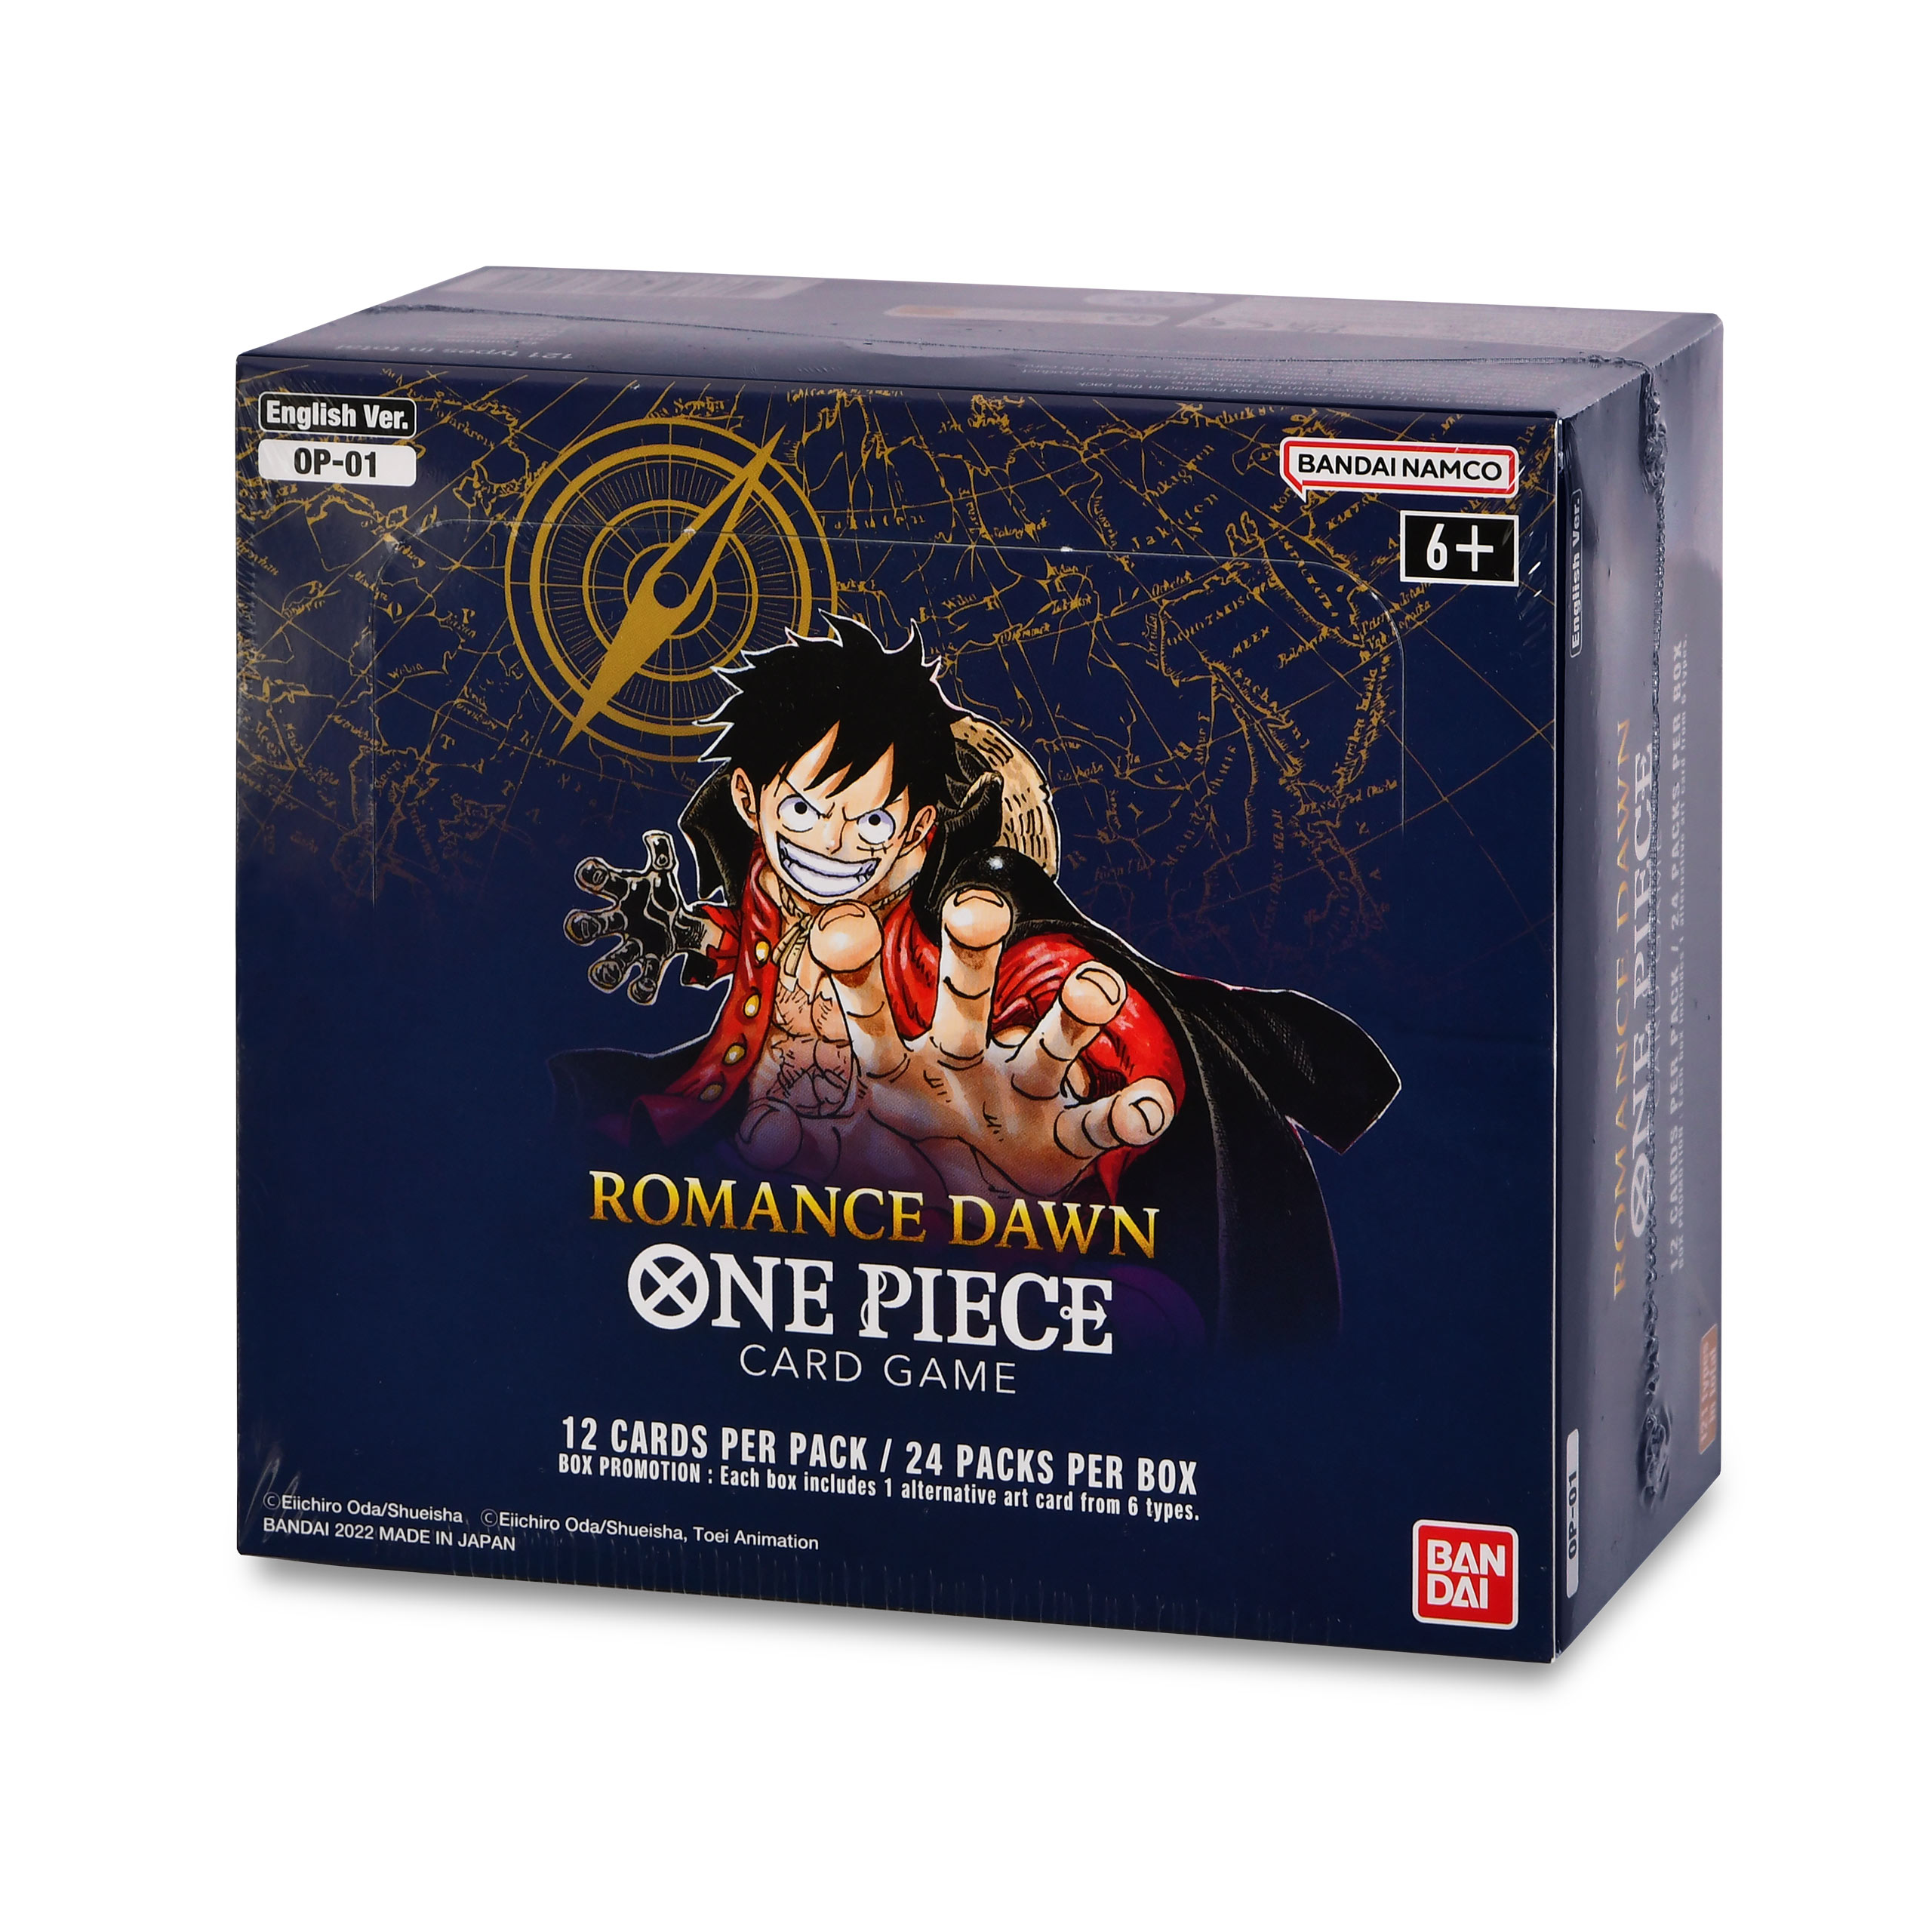 One Piece Card Game - Romance Dawn Booster Display